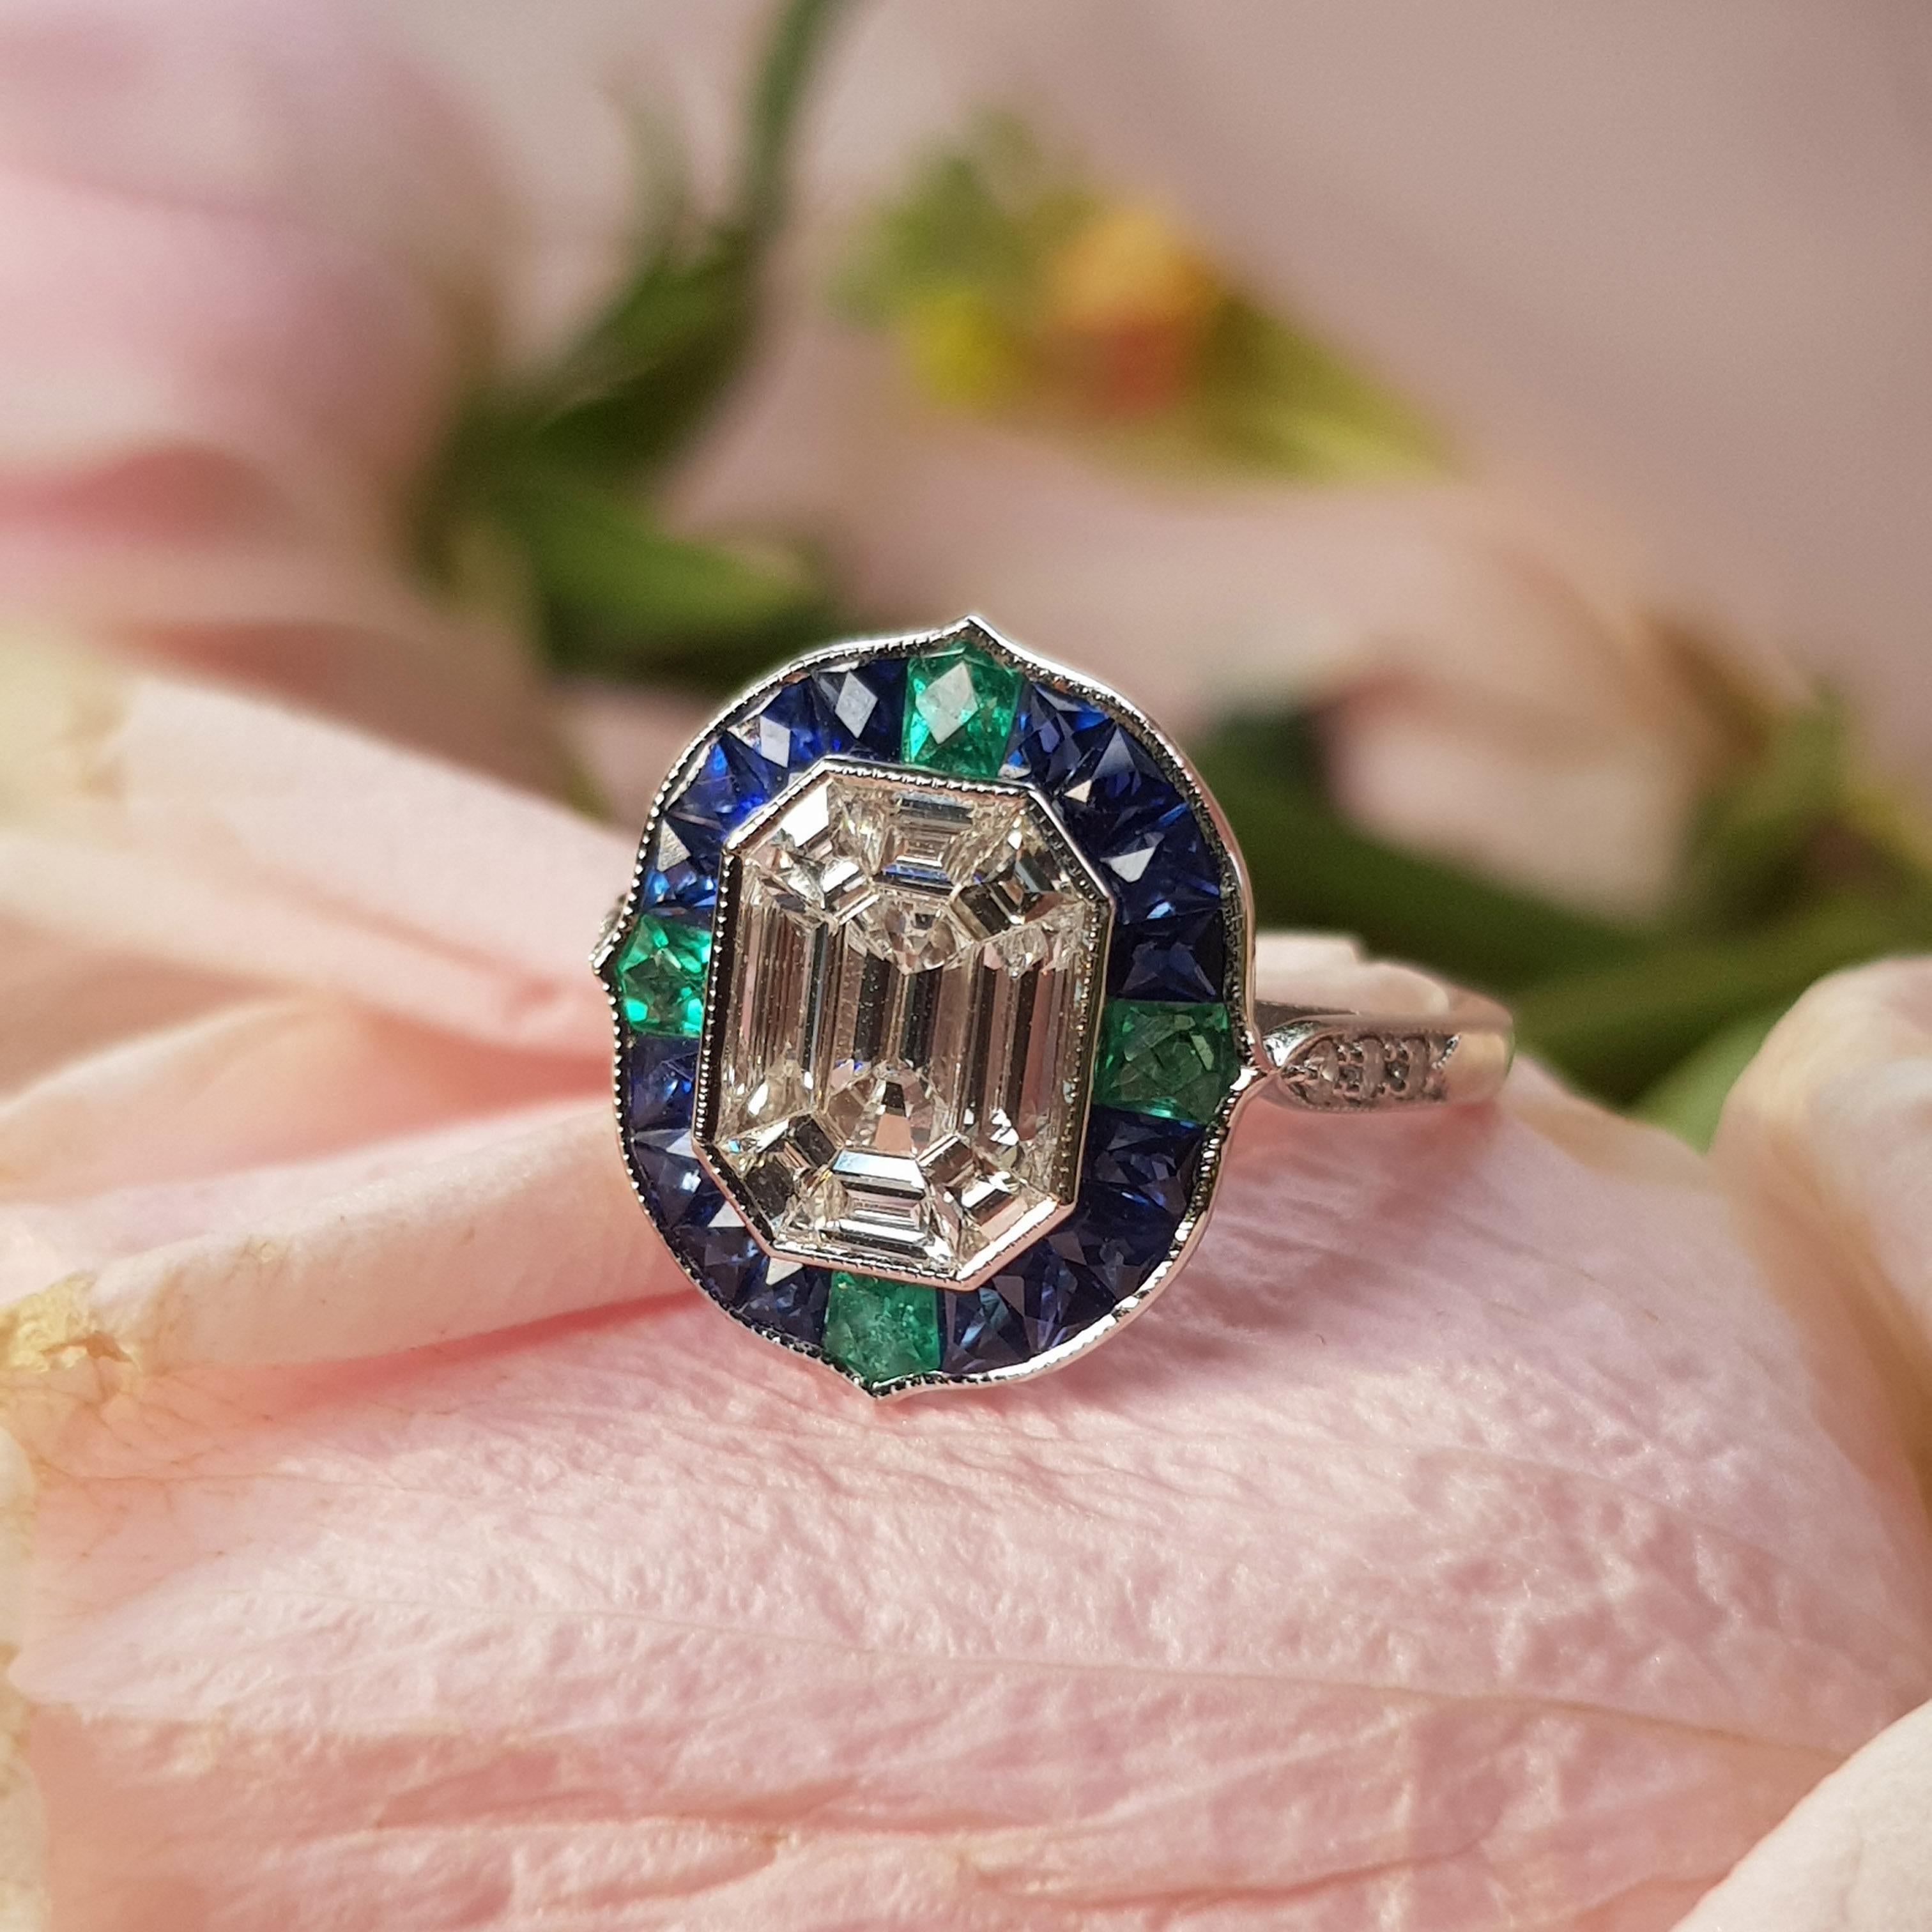 For Sale:  Illusion Setting Diamond with Sapphire Emerald Art Deco Style Ring in 18k Gold 3